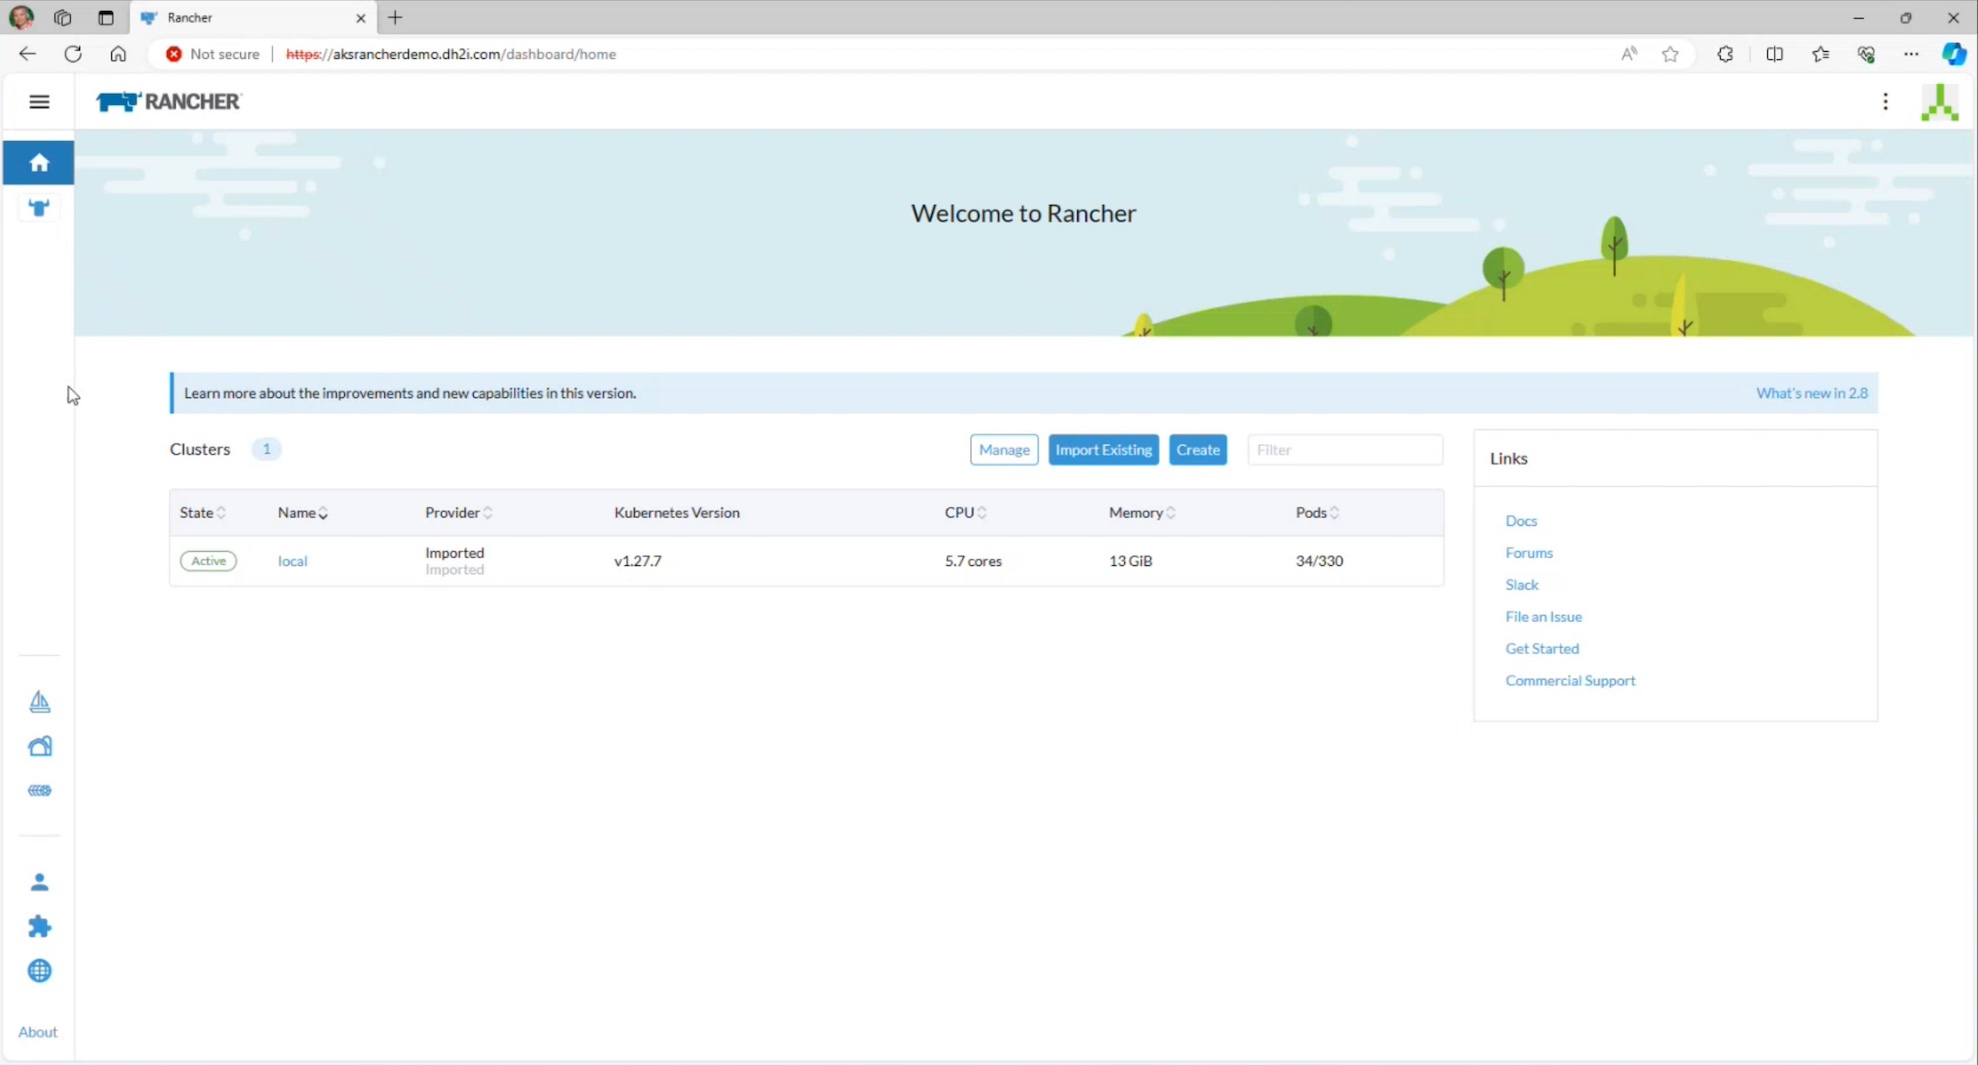 View the Rancher Prime Dashboard.